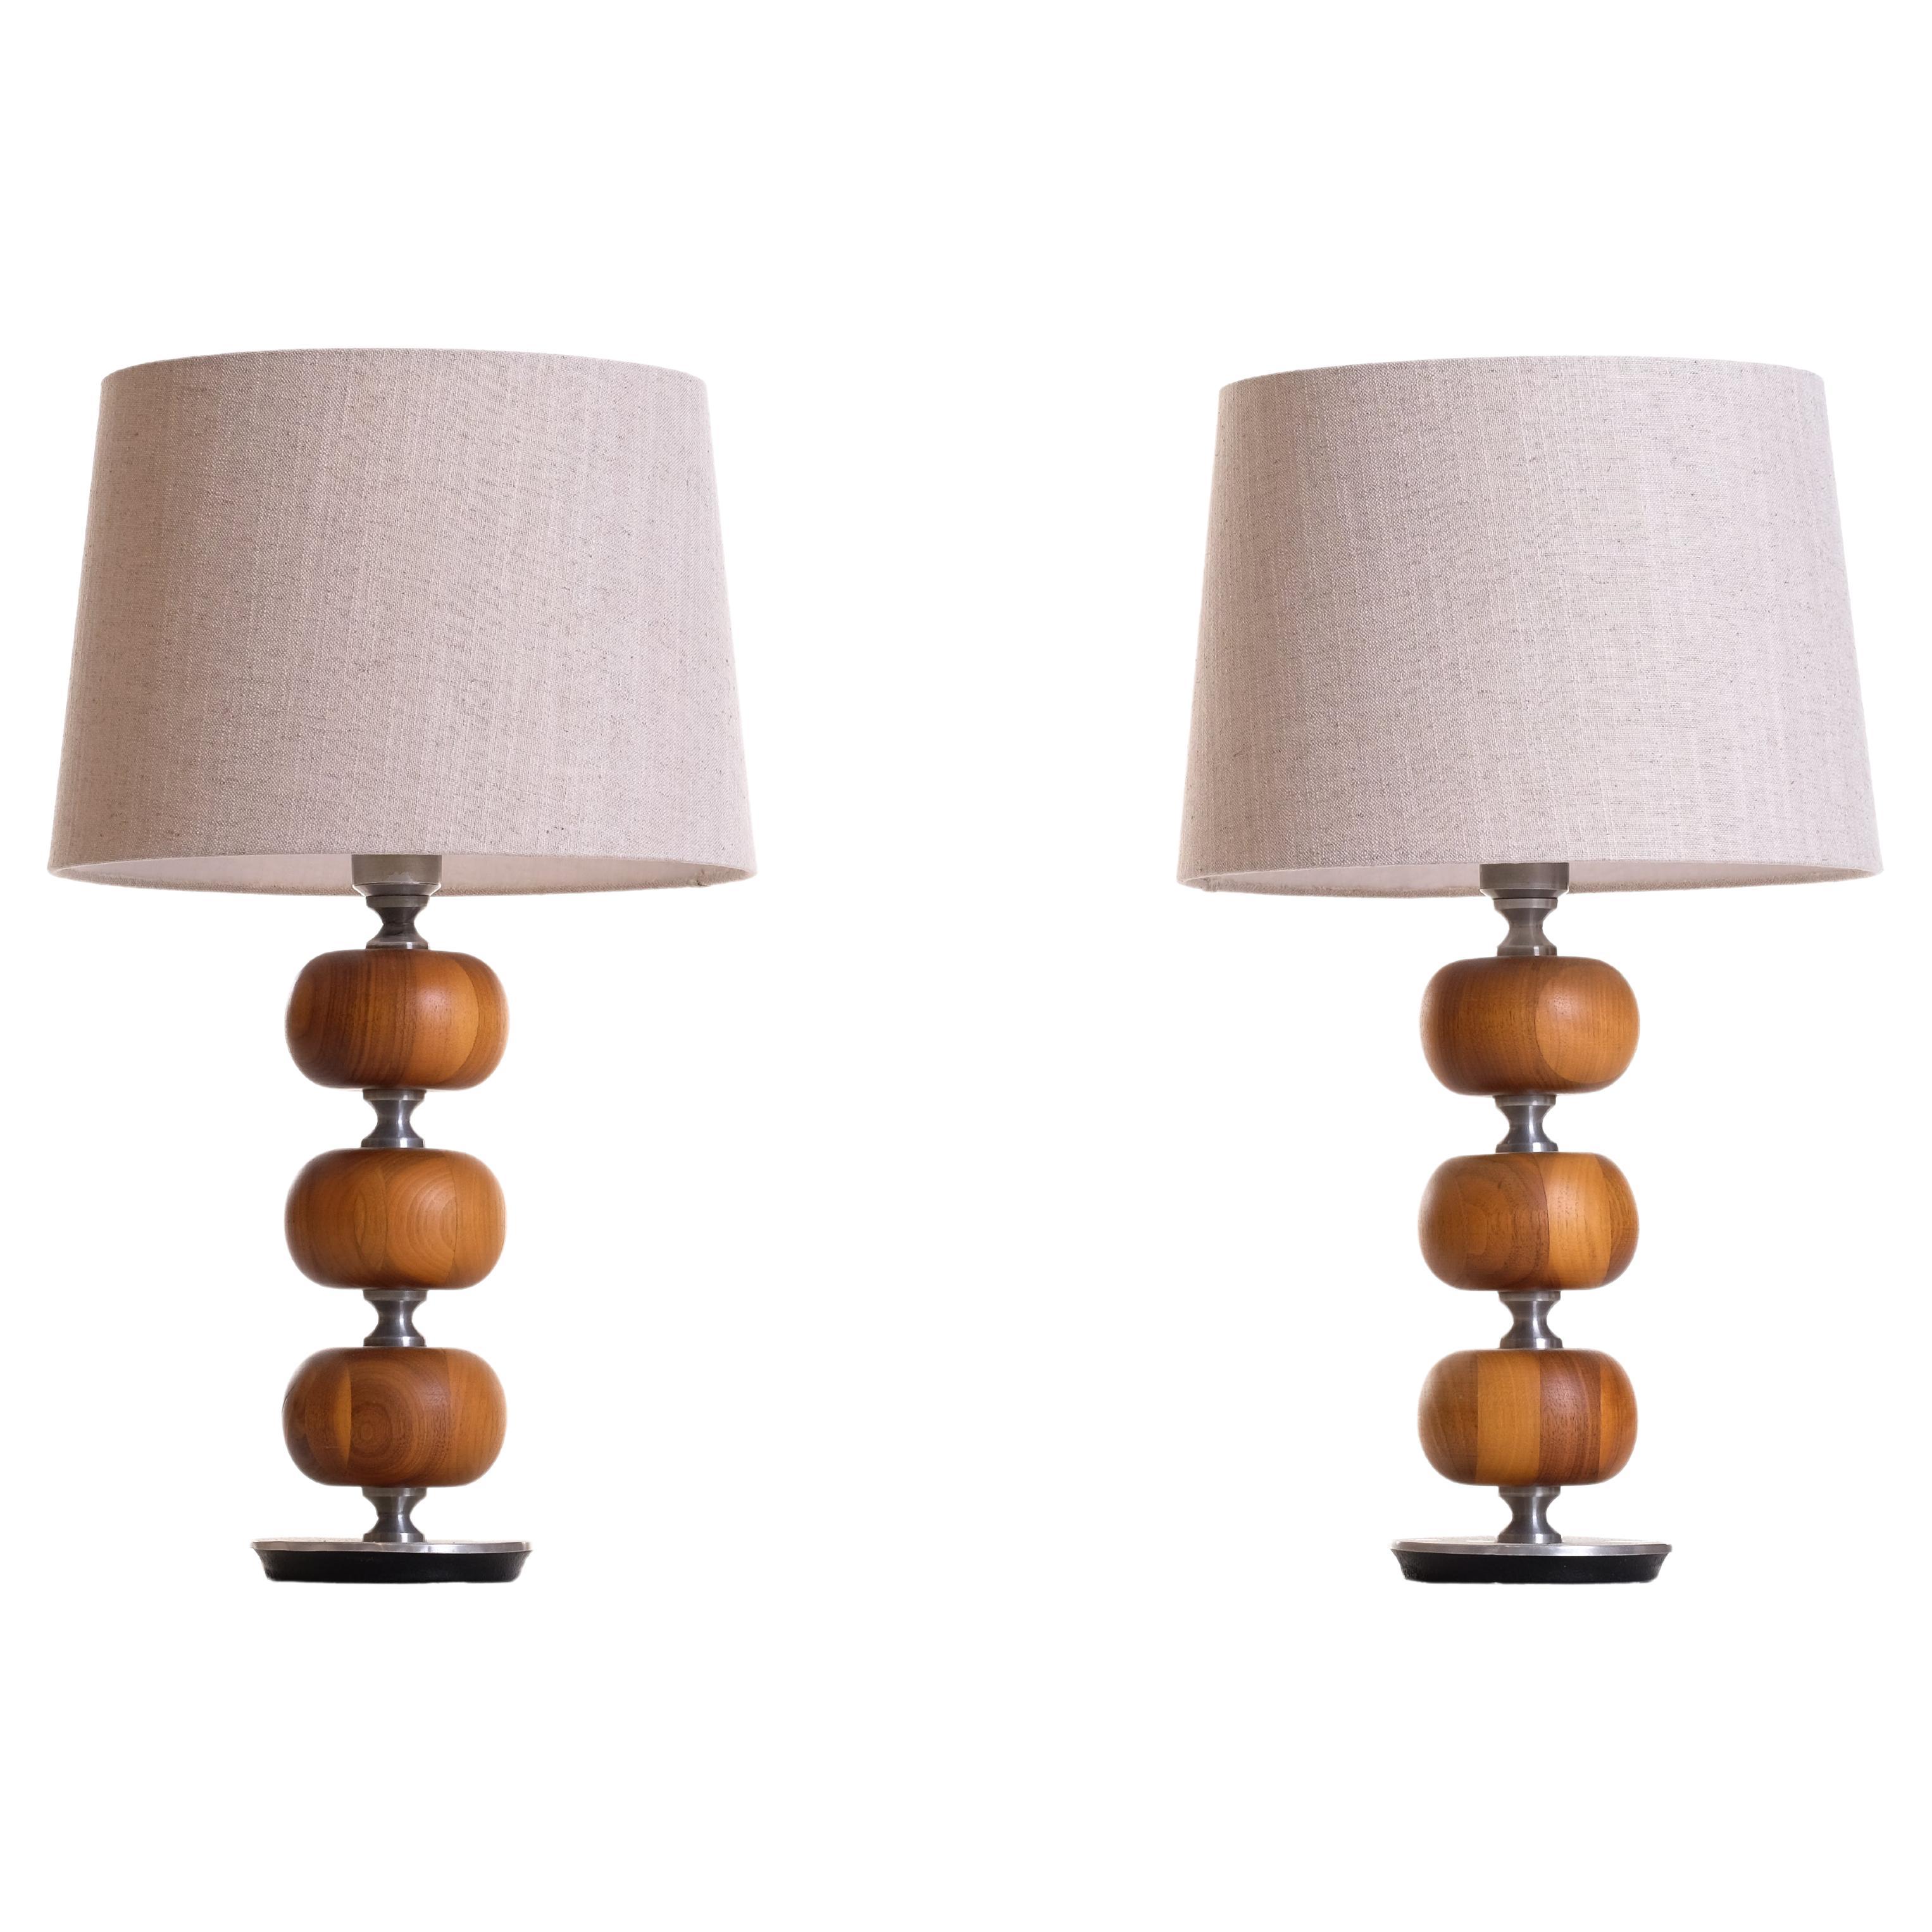 Pair of Swedish Table Lamps by Tranås Stilarmatur, 1960s For Sale